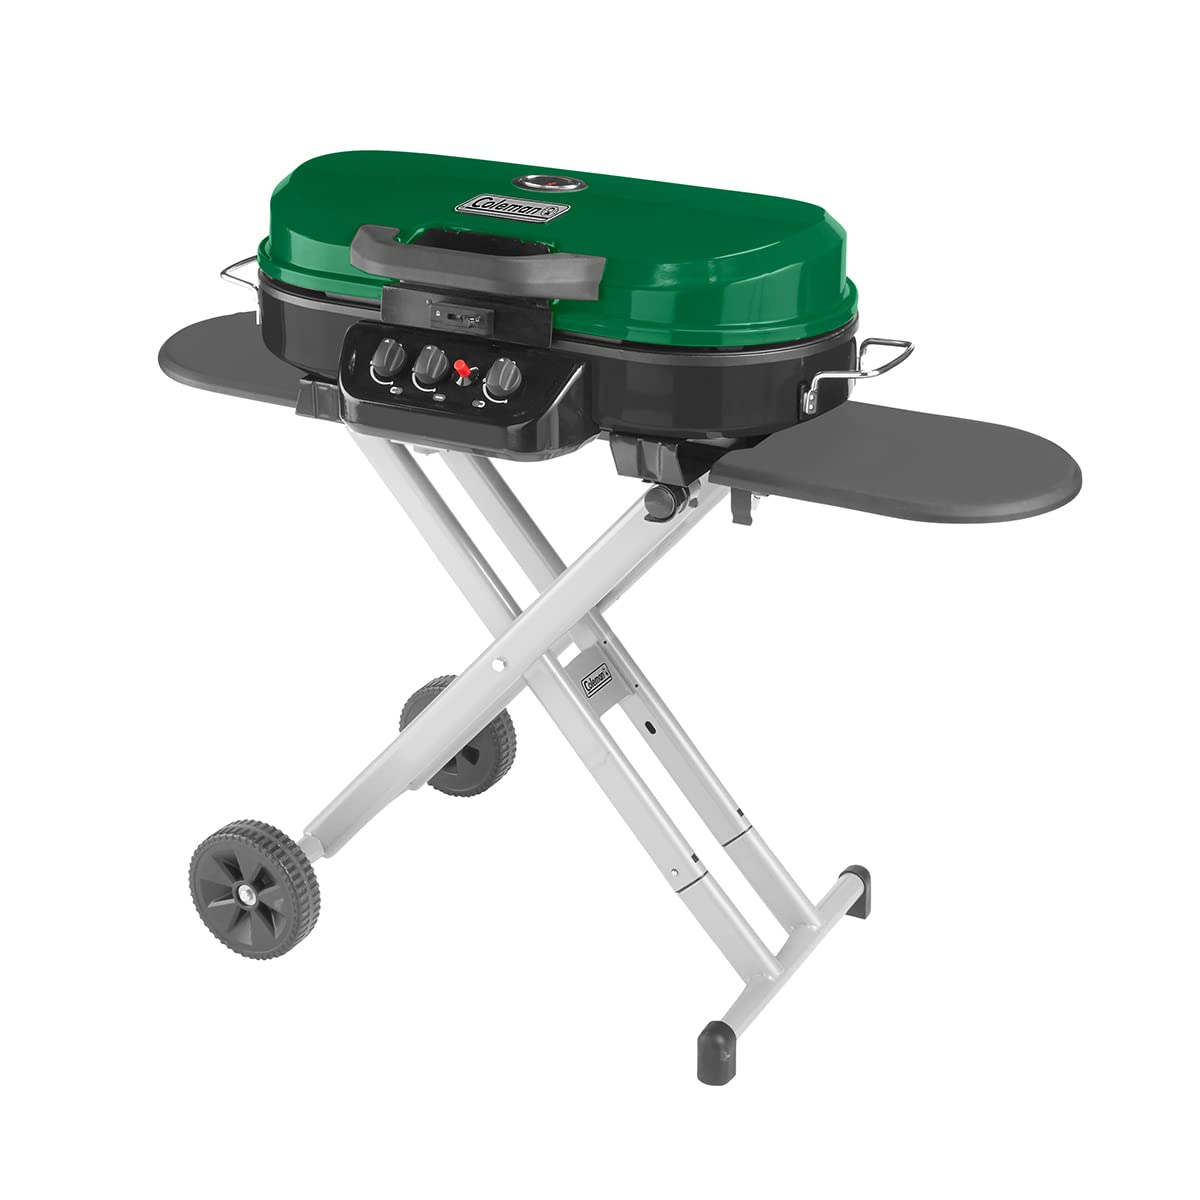 20,000-BTU Coleman Roadtrip 285 Portable Stand-Up Propane Grill w/ Wheels, Collapsable Legs, & 2 Side Tables (Green) $200 + Free Shipping